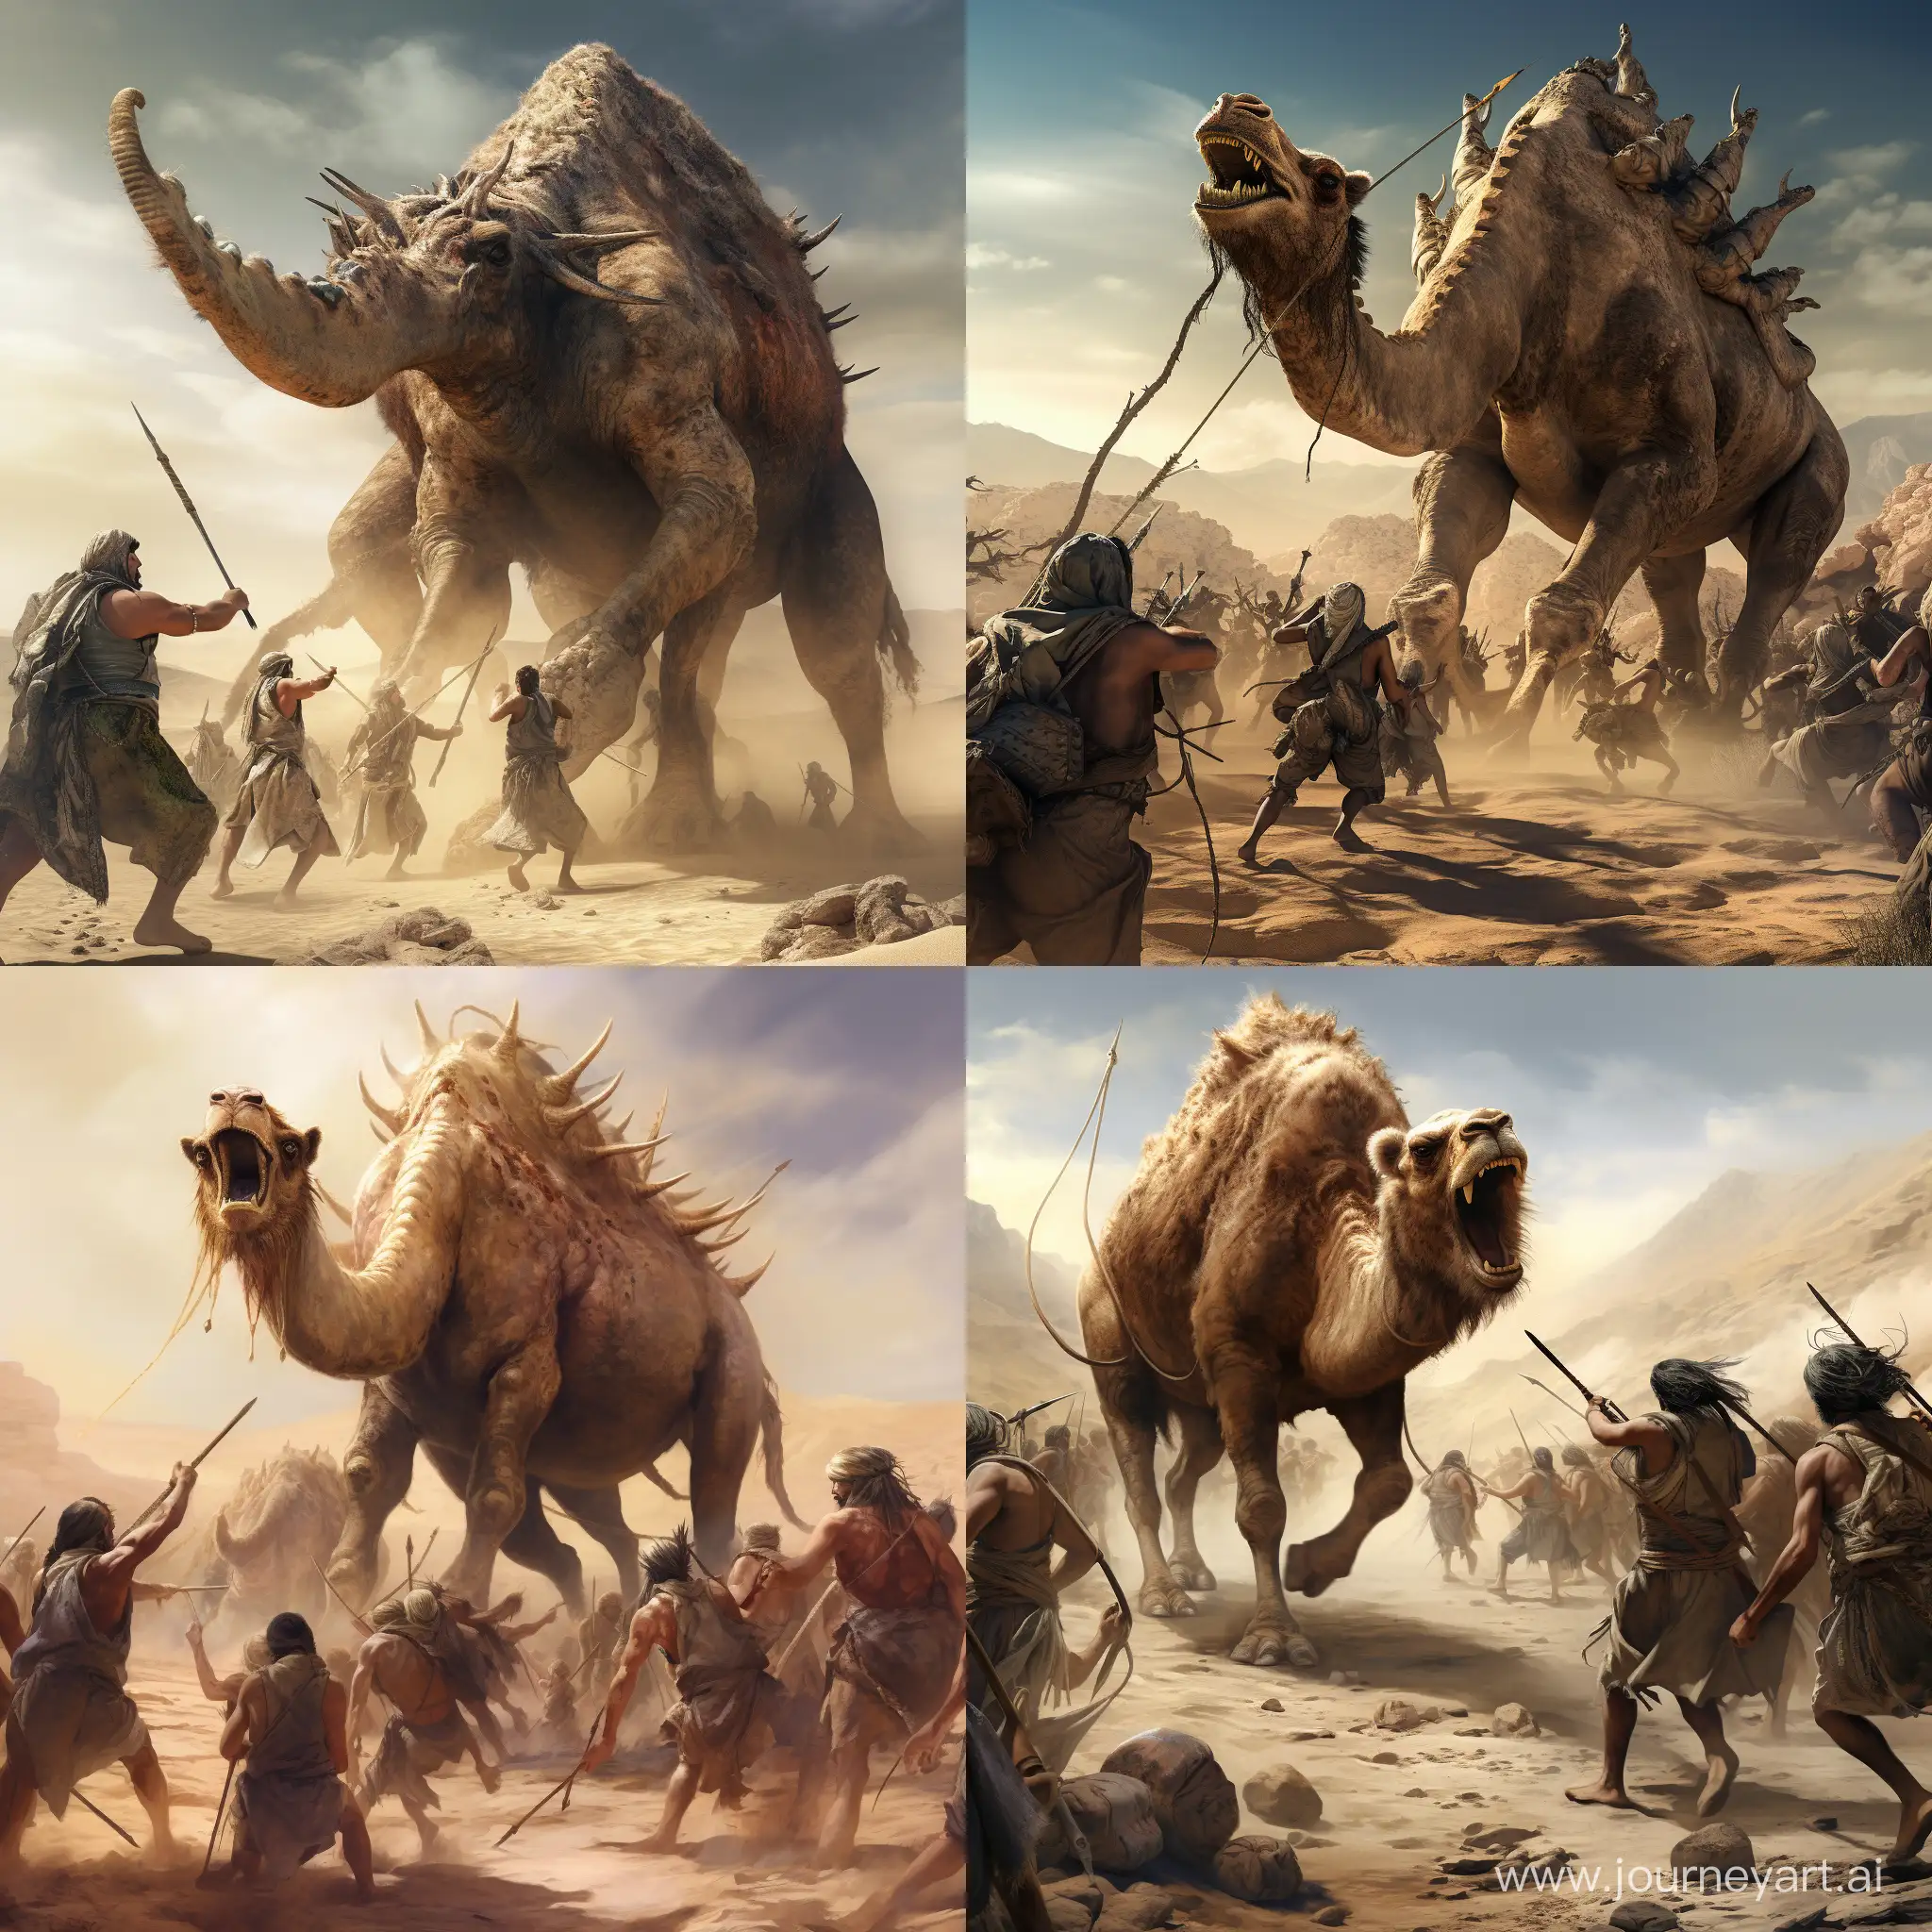 9 DESERT DWELLERS ATTACKING A CAMEL WITH BOW AND ARROW IN DESERT 